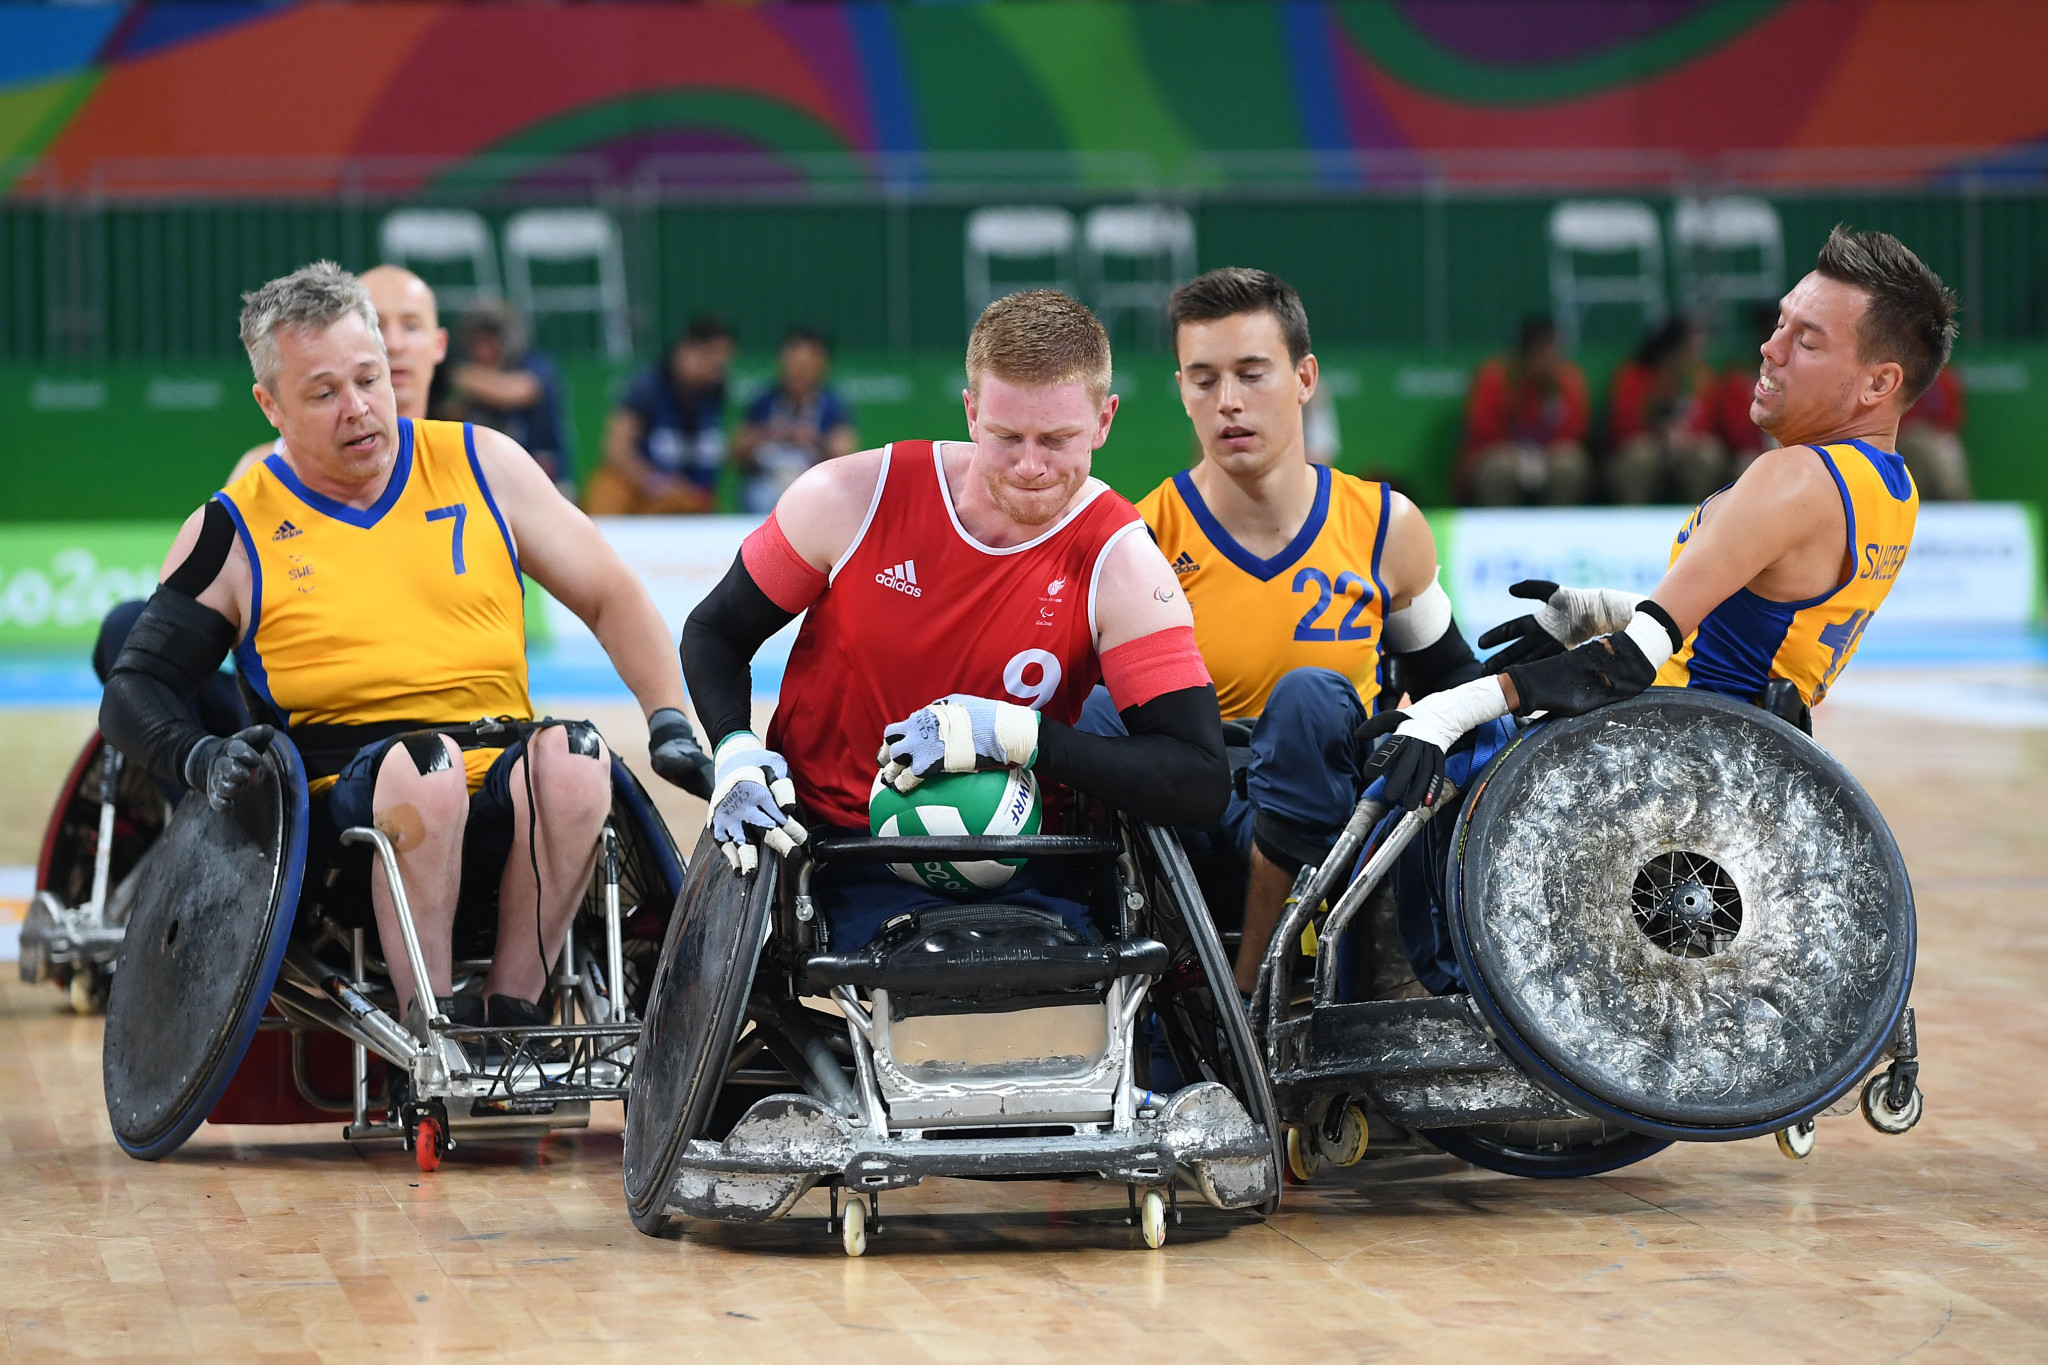 Wheelchair rugby has grown into a major Paralympic sport ©Getty Images